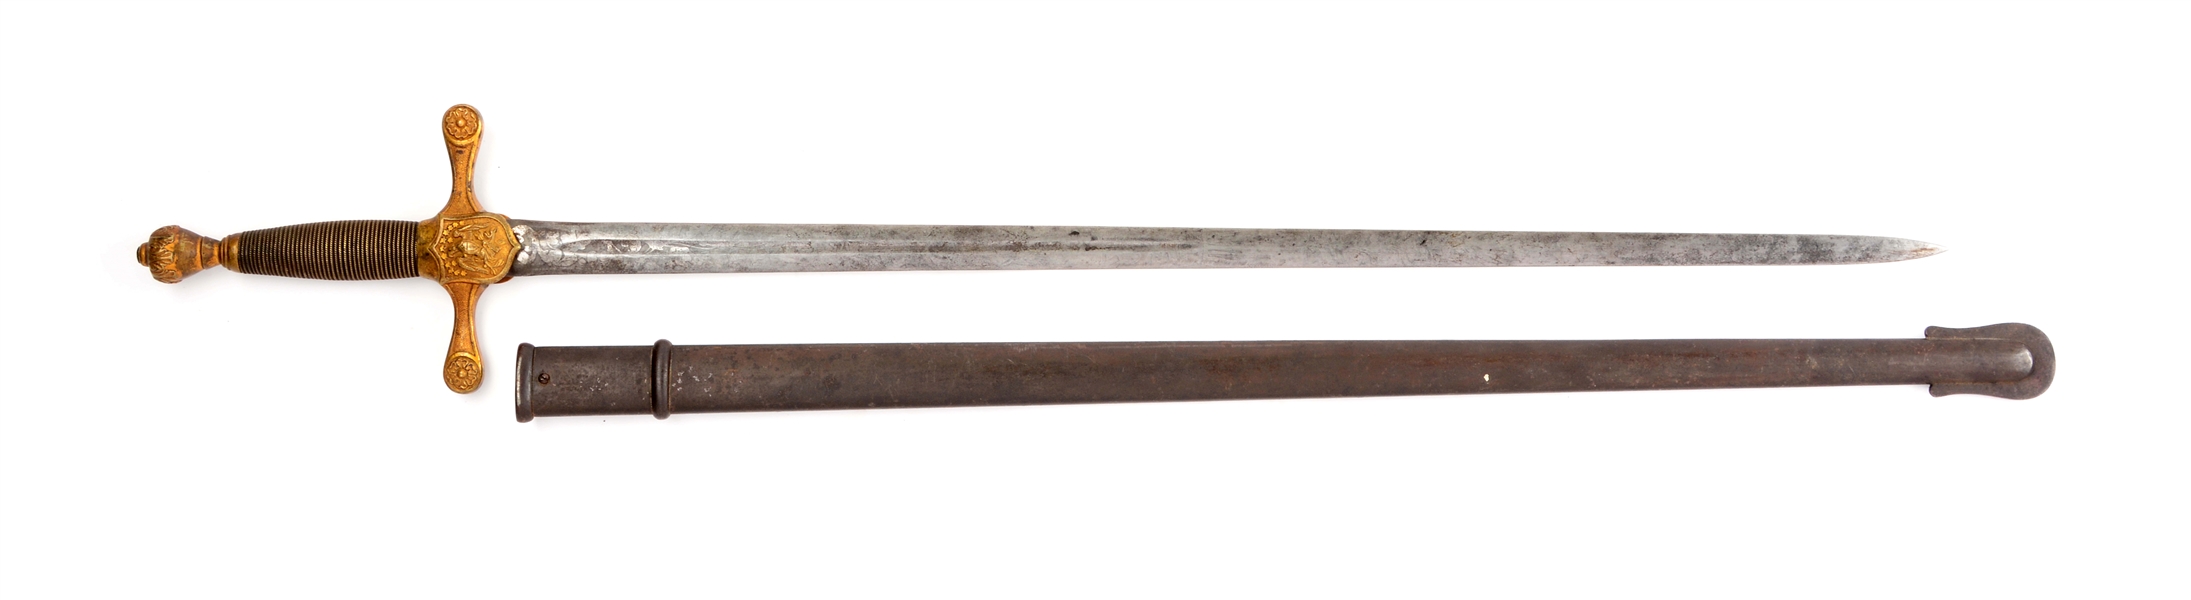 RARE MODEL 1839 WEST POINT CADET SWORD BY AMES.